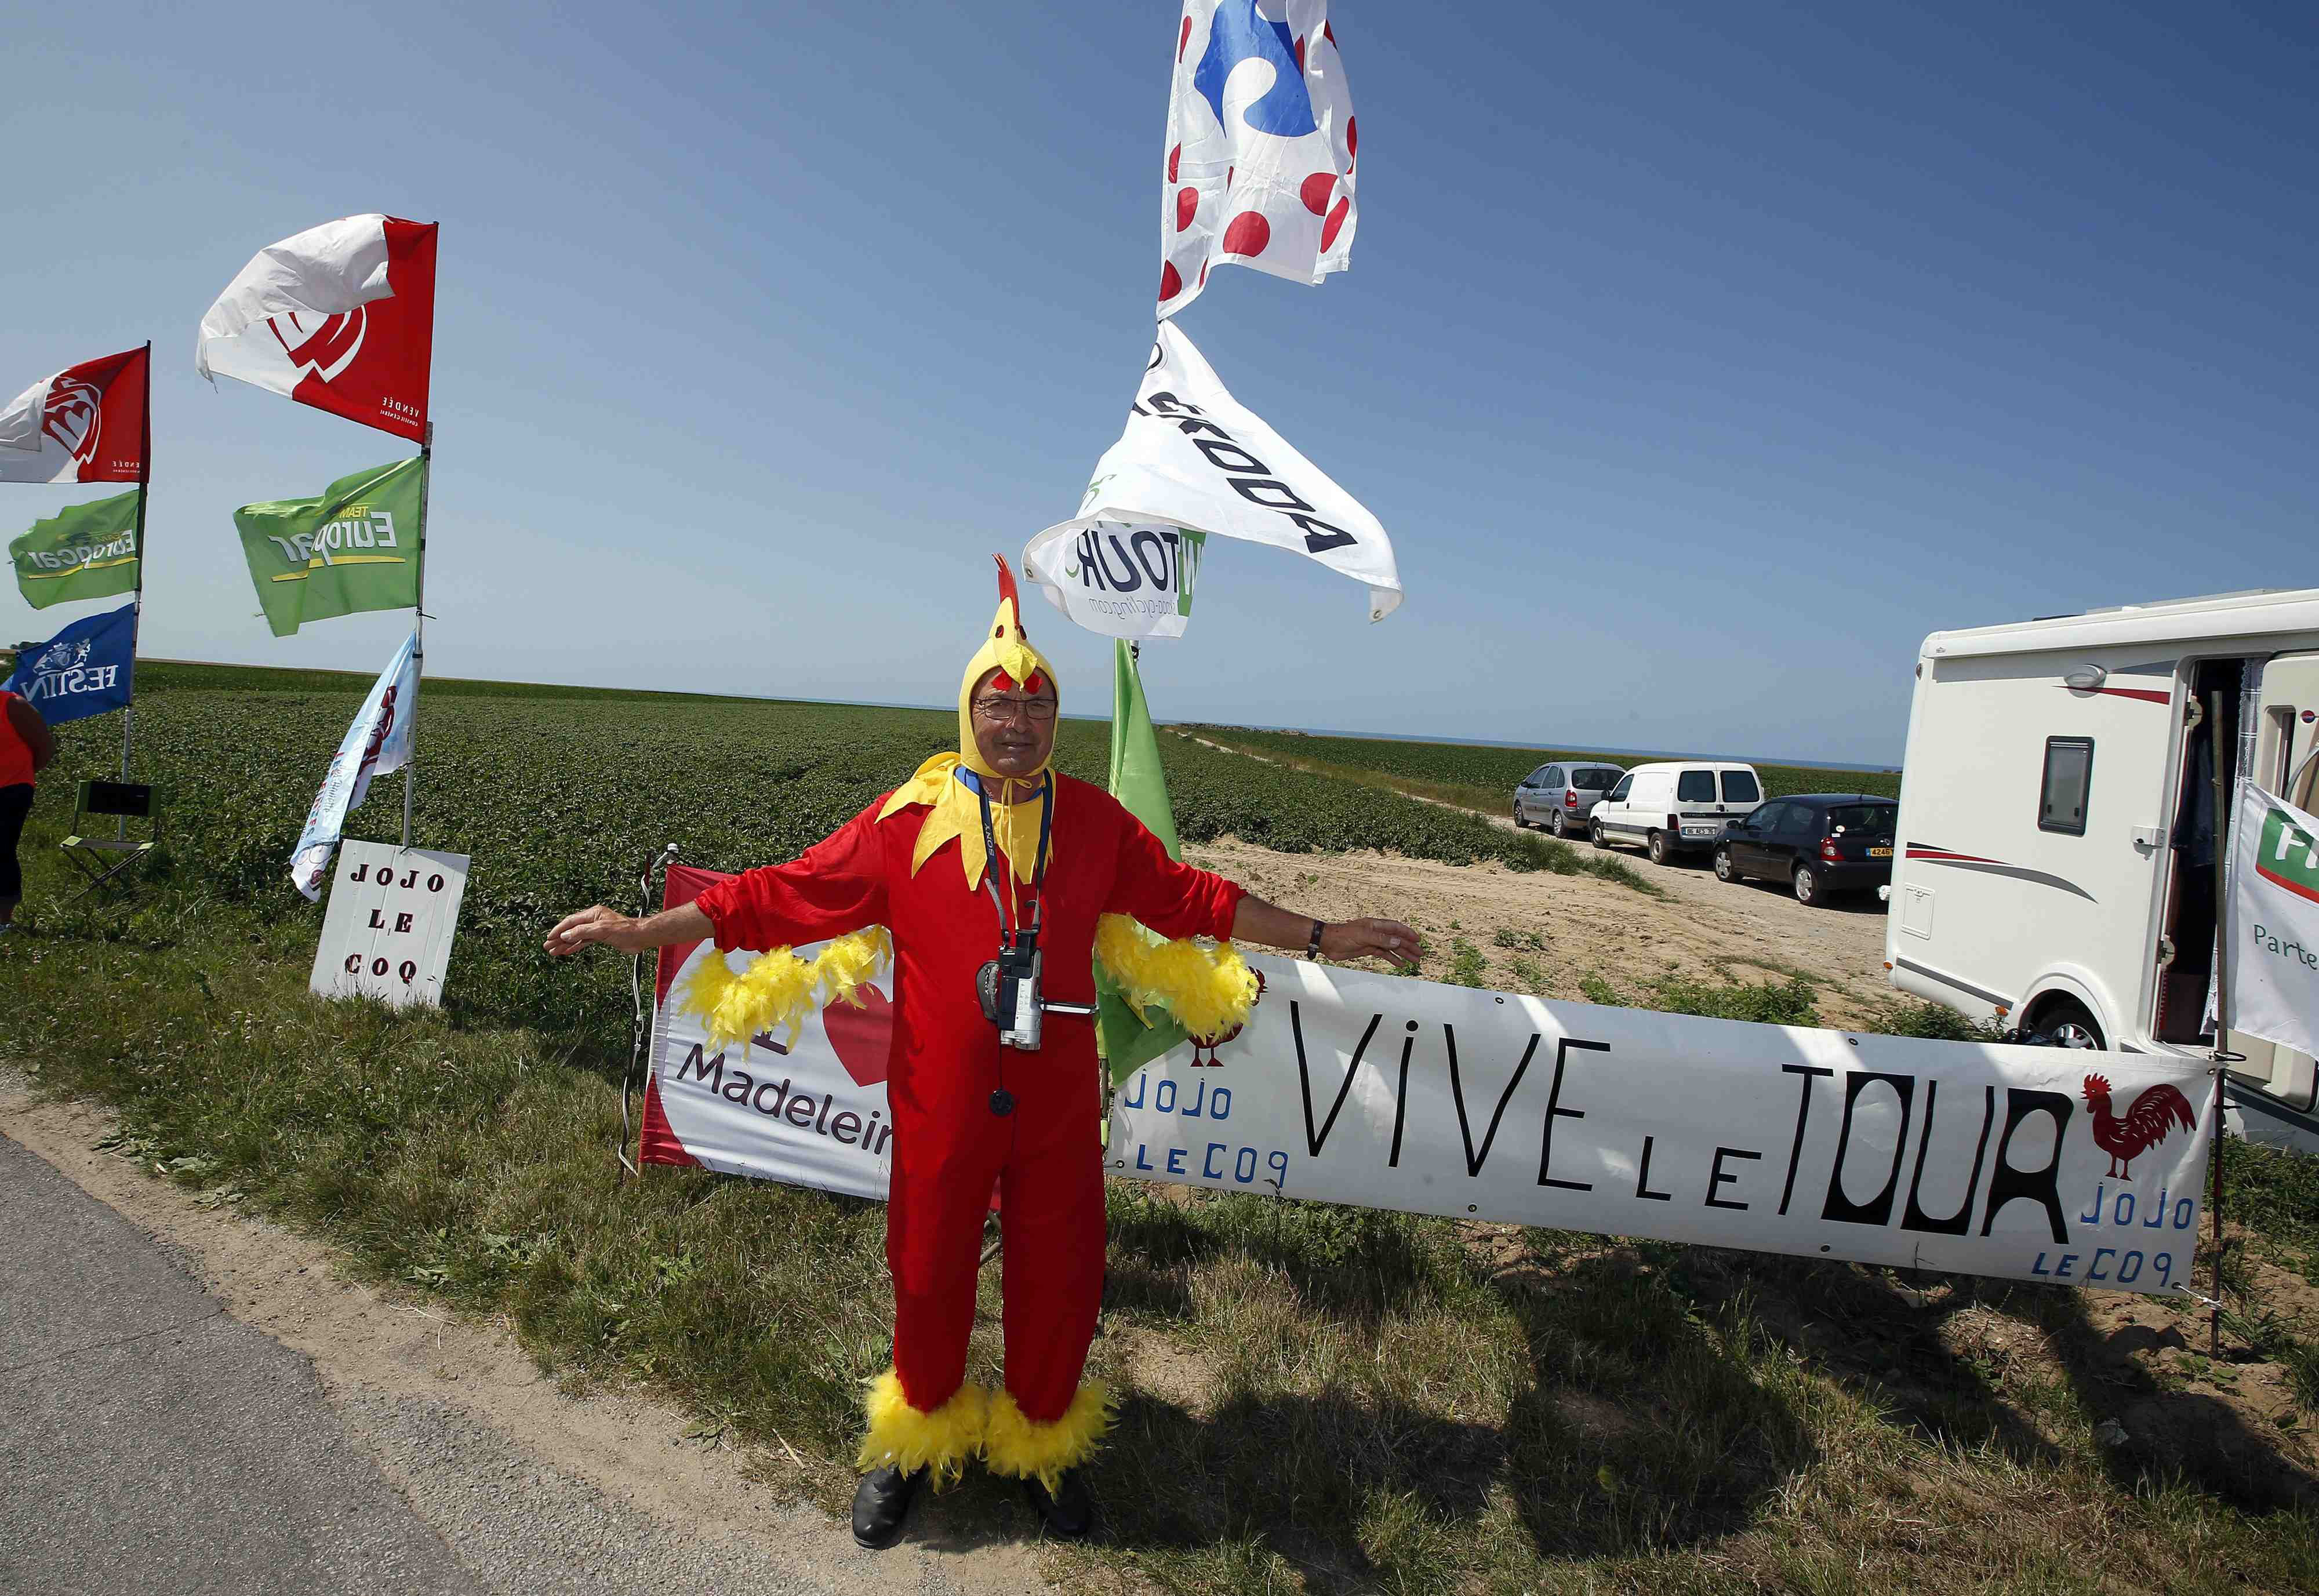 French cyclist fan, Jojo the rooster, waits for the riders during the sixth stage of the race from Abbeville to Le Havre, France on July 9, 2015.